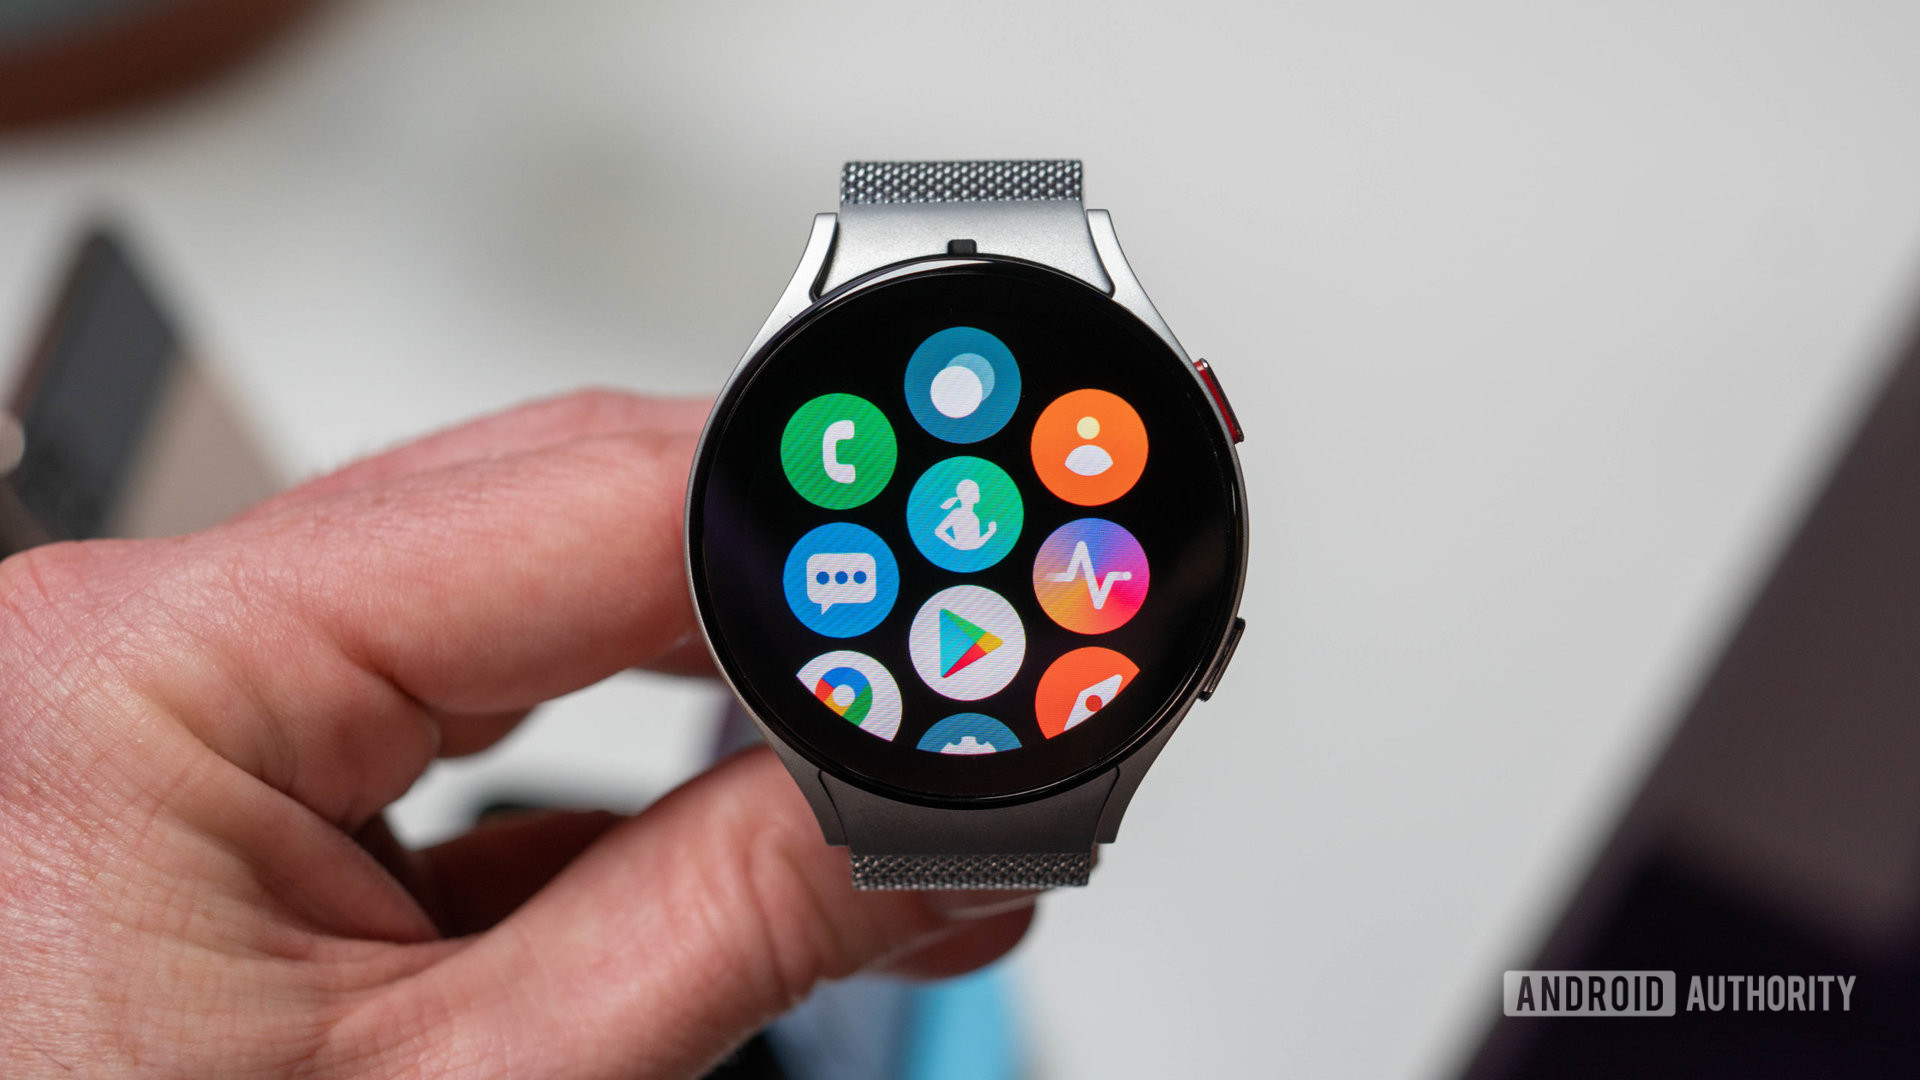 Samsung Galaxy Watch 5 in silver color with metal bracelet in hand showing app picker